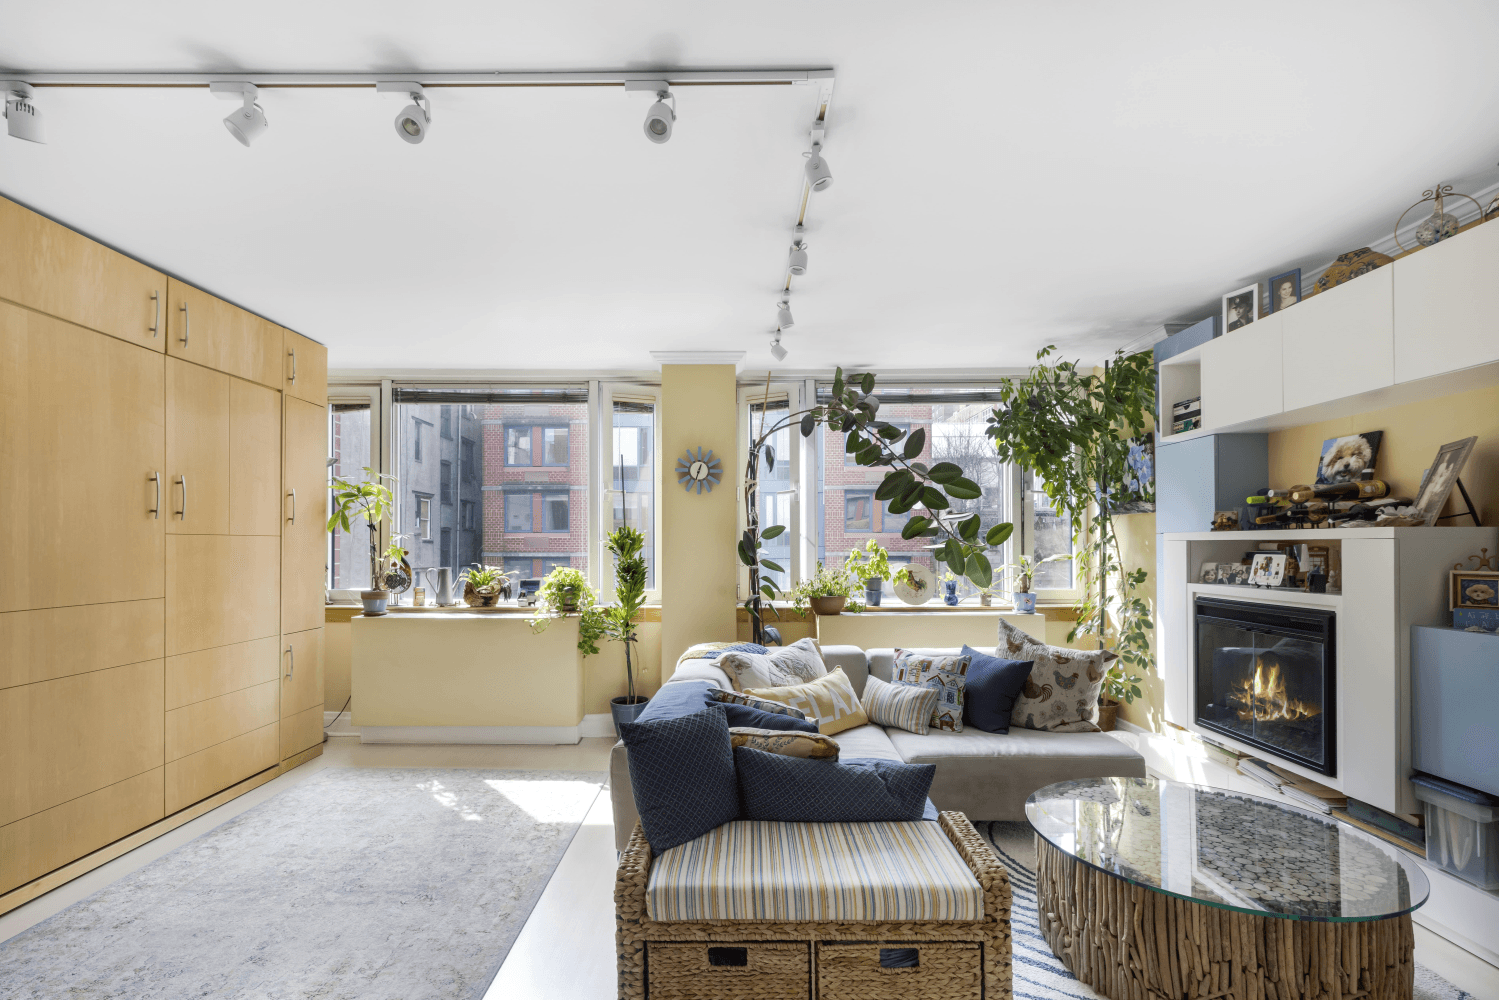 Open the door to your New York City dream come true at 404 East 76th Street.